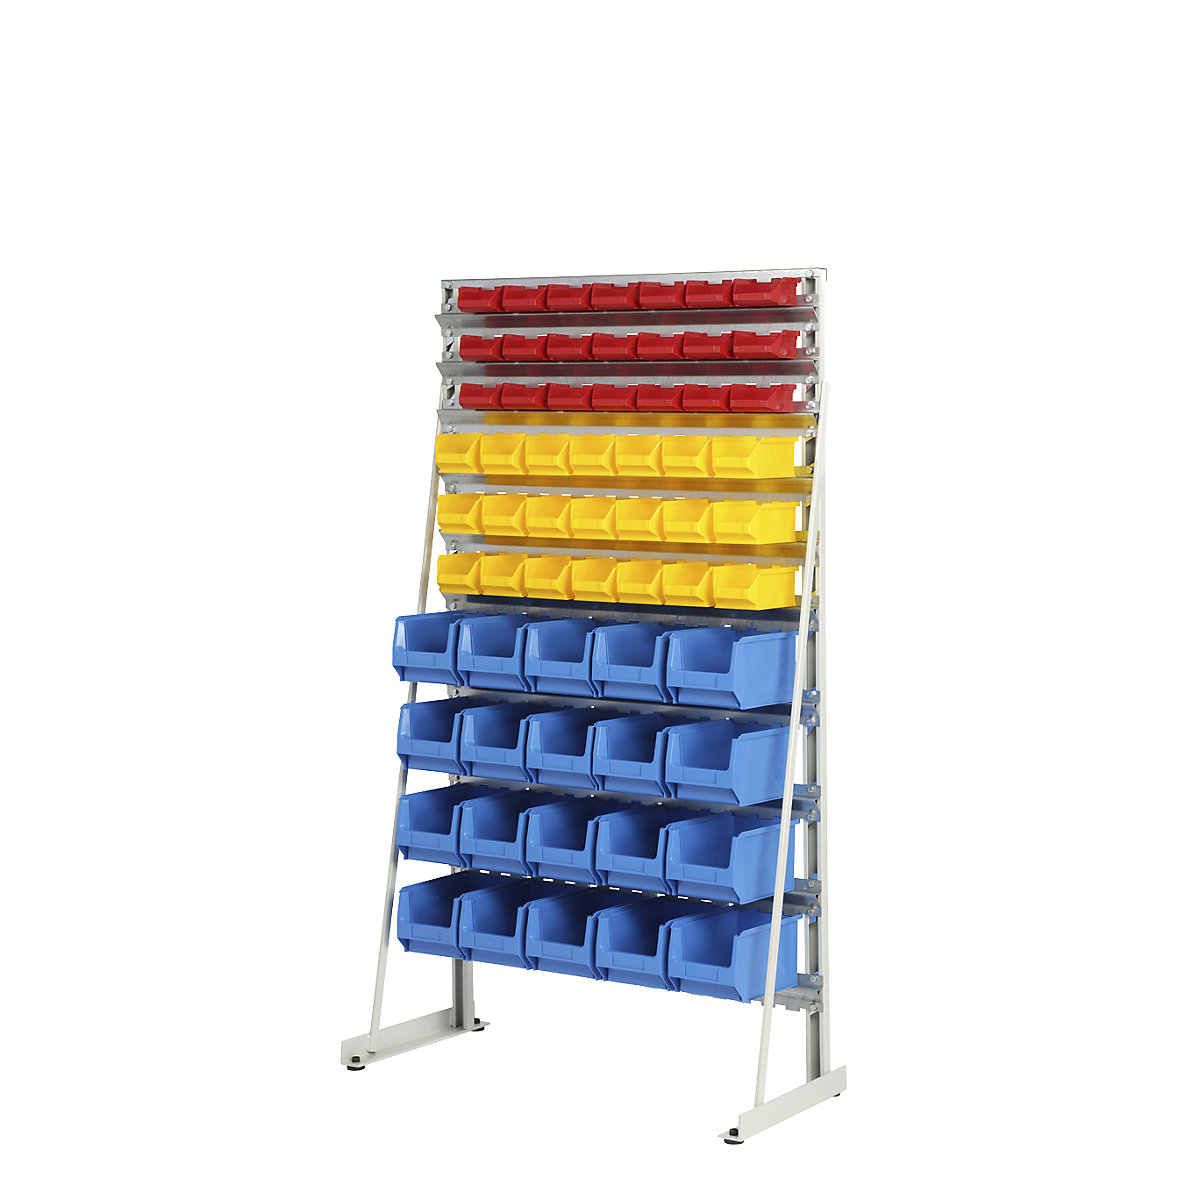 Free-standing small parts shelf unit with open fronted storage bins - eurokraft pro